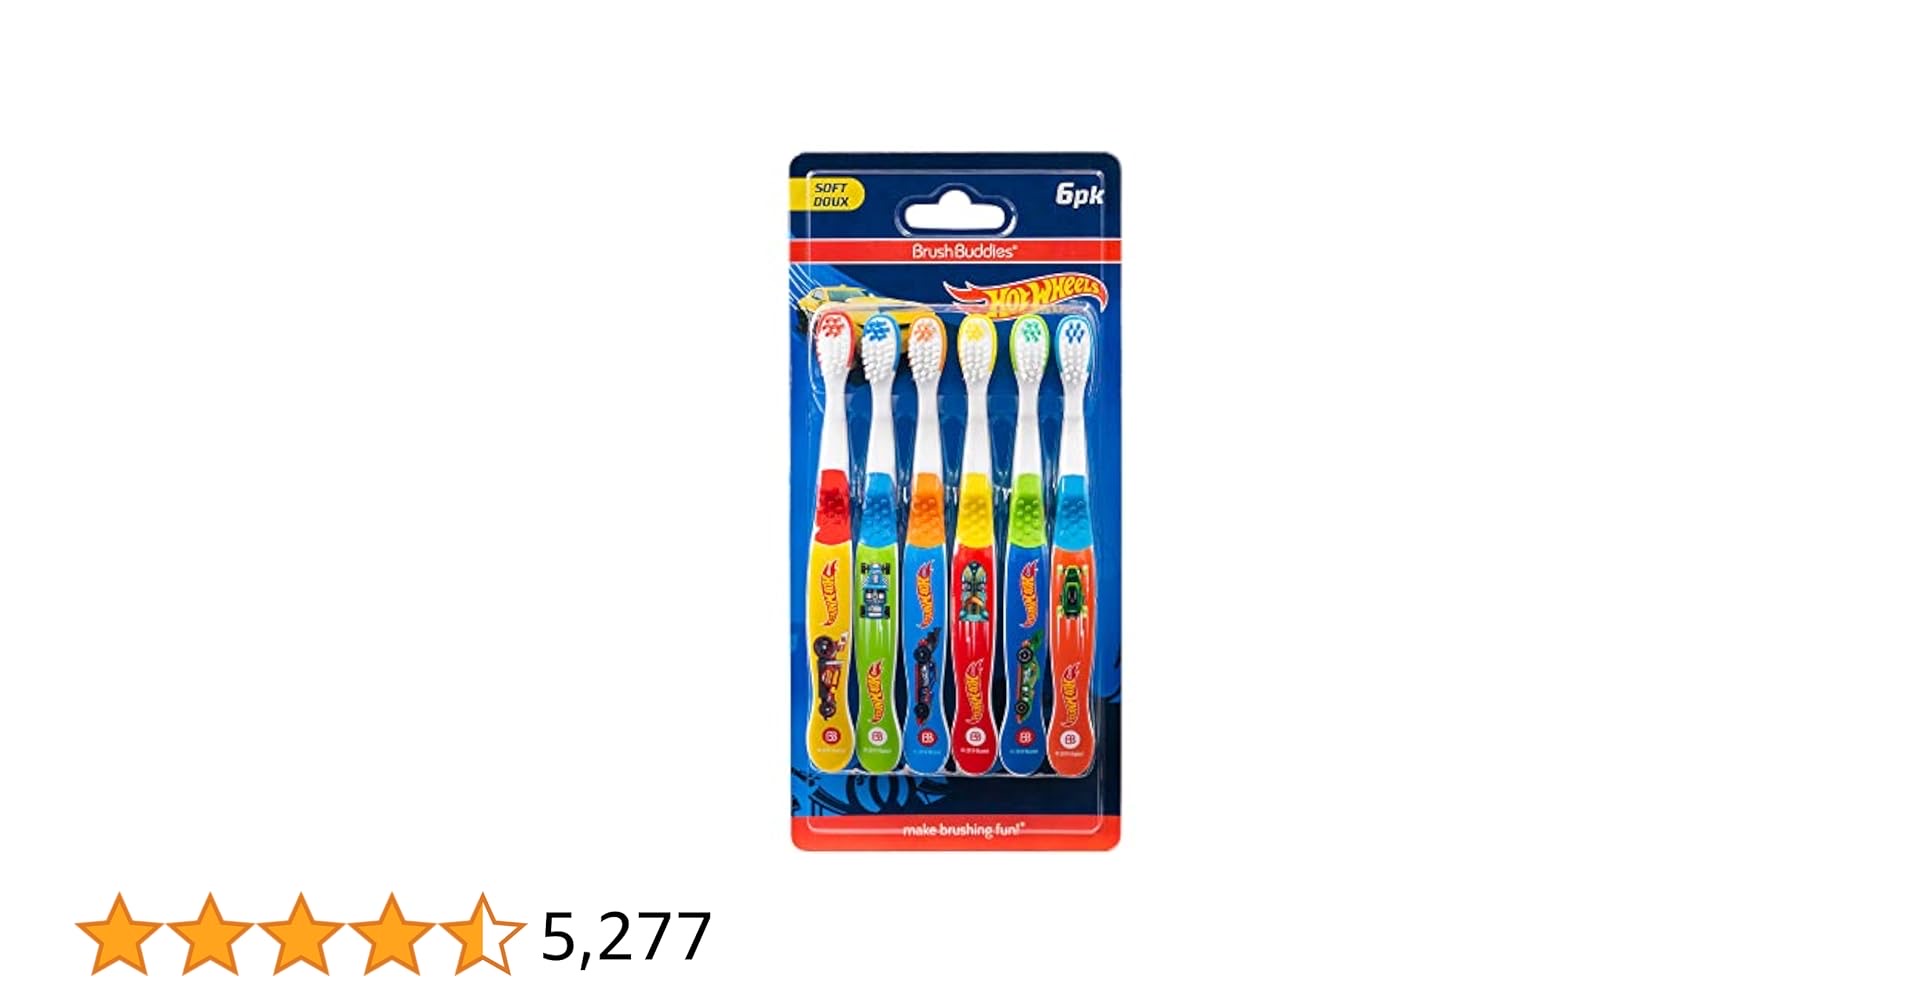 Brush Buddies 6-Pack Hot Wheels Toothbrush for Kids, Kids Battery Powered Toothbrushes, Toothbrush Pack, Soft Bristle Toothbrushes for Kids, Toddler Toothbrush Ages 2-4, Multicolor